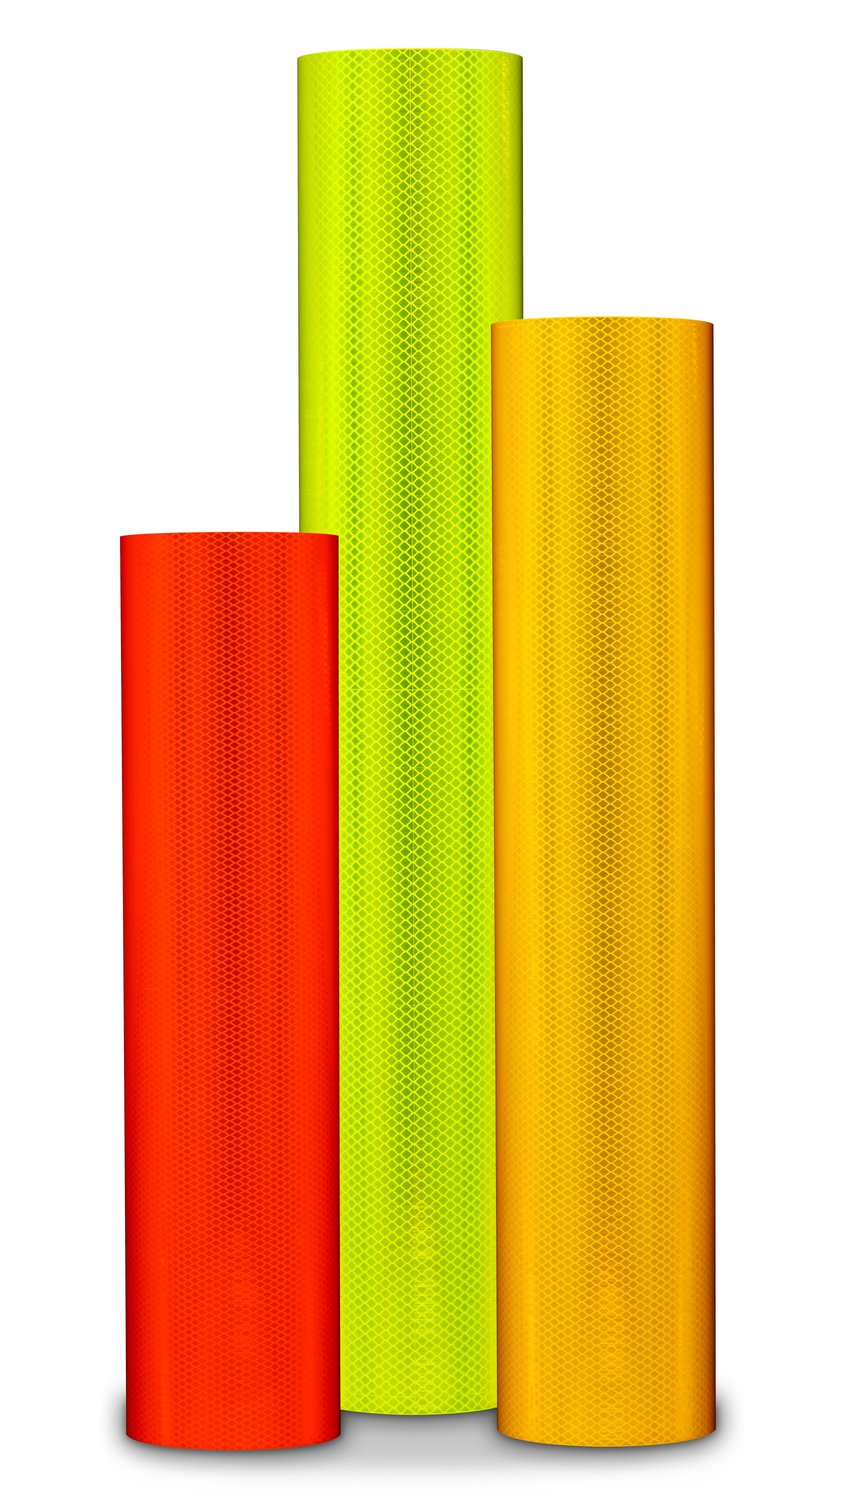 7100155822 - 3M Diamond Grade DG³ Reflective Sheeting 4081, Fluorescent Yellow,
with Lead/Trailer, 24 in x 50 yd